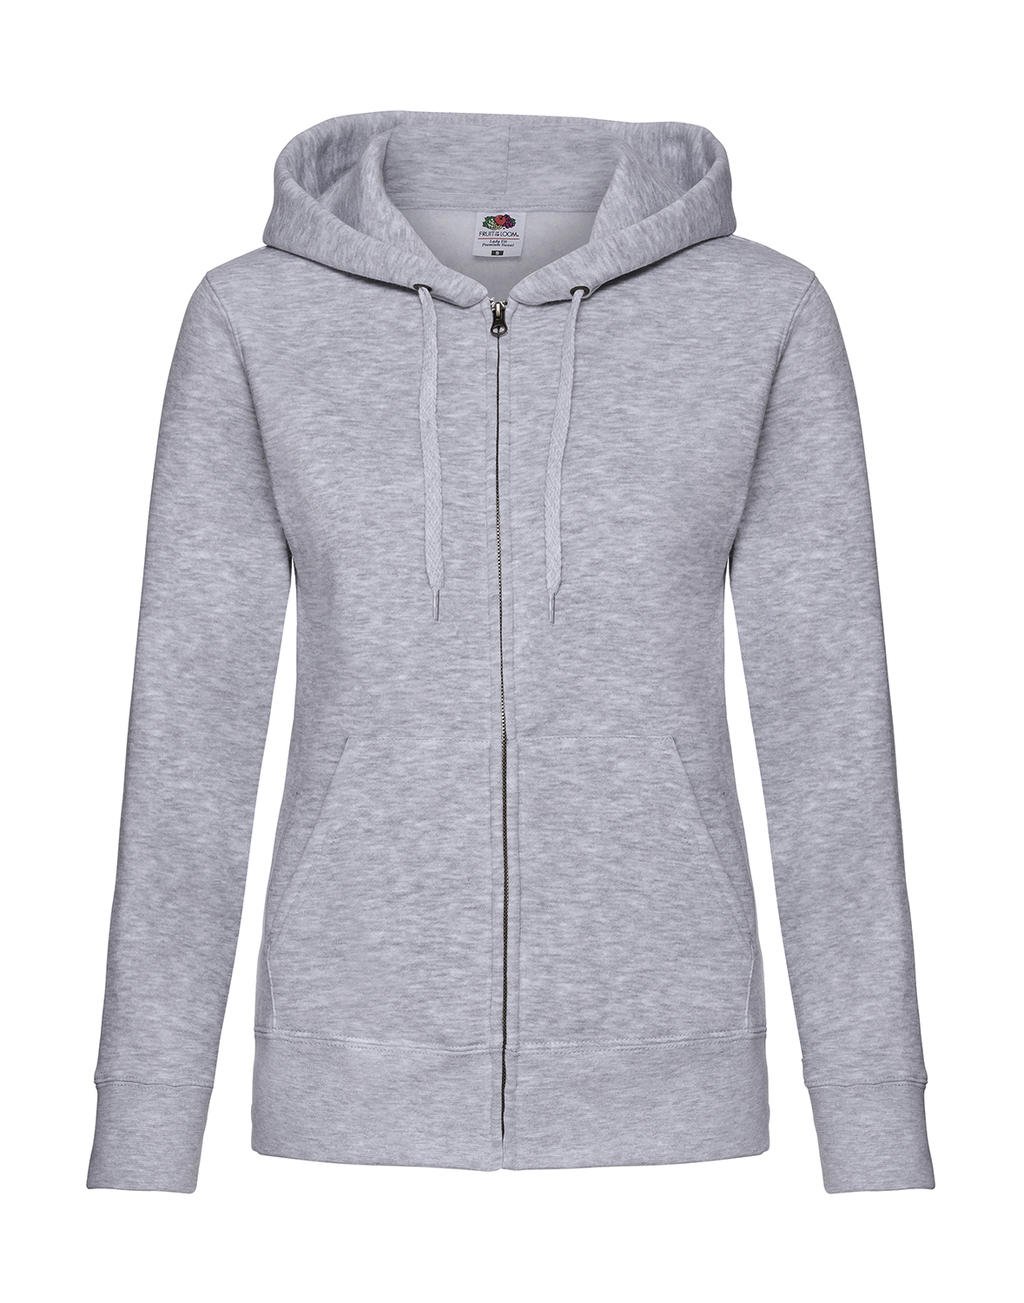  Premium Hooded Sweat Jacket Lady-Fit in Farbe Heather Grey